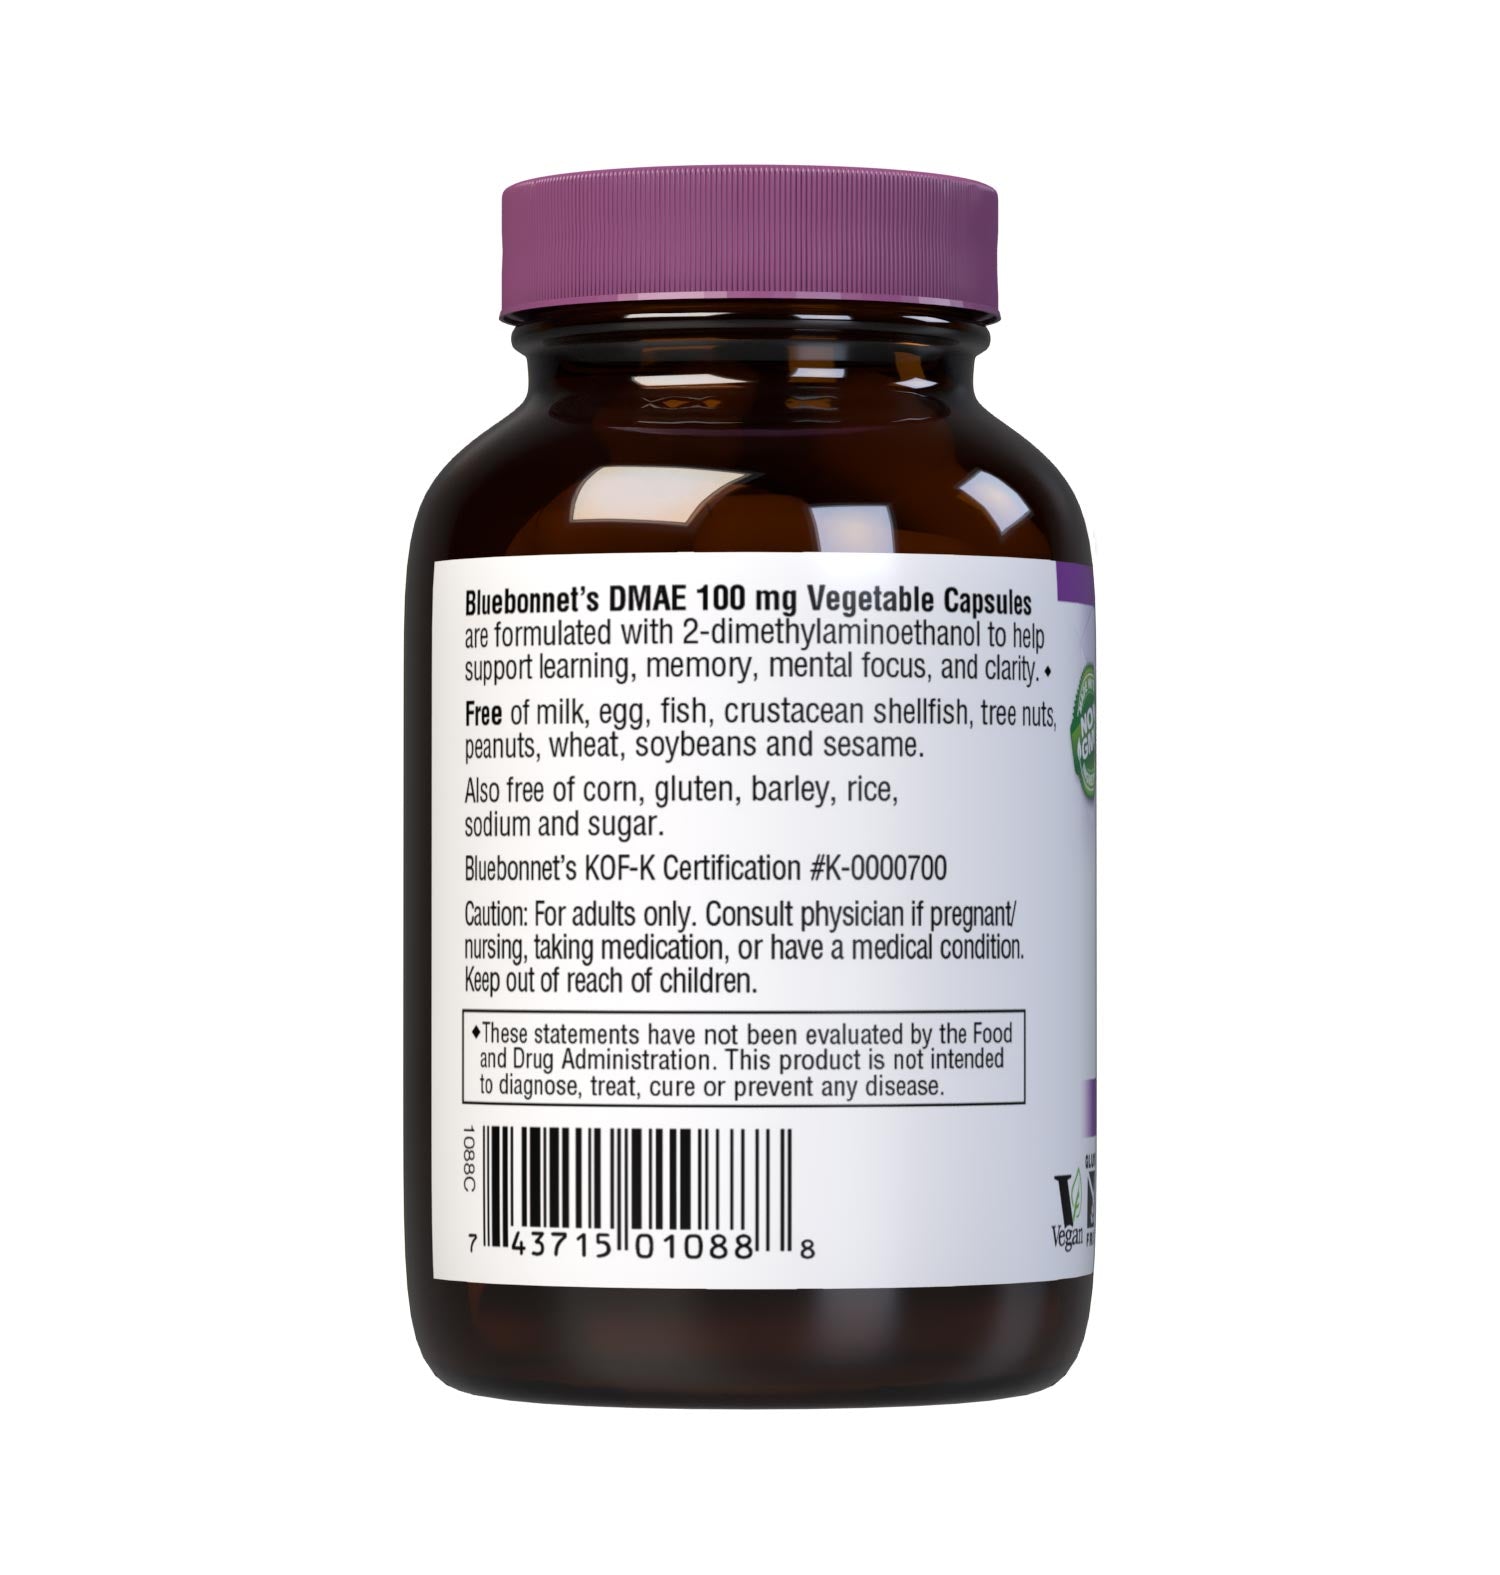 Bluebonnet’s DMAE 100 mg 50 Vegetable Capsules are formulated with 2-dimethylaminoethanol bitartrate to help support learning, memory, mental focus, and clarity. Description panel. #size_50 count